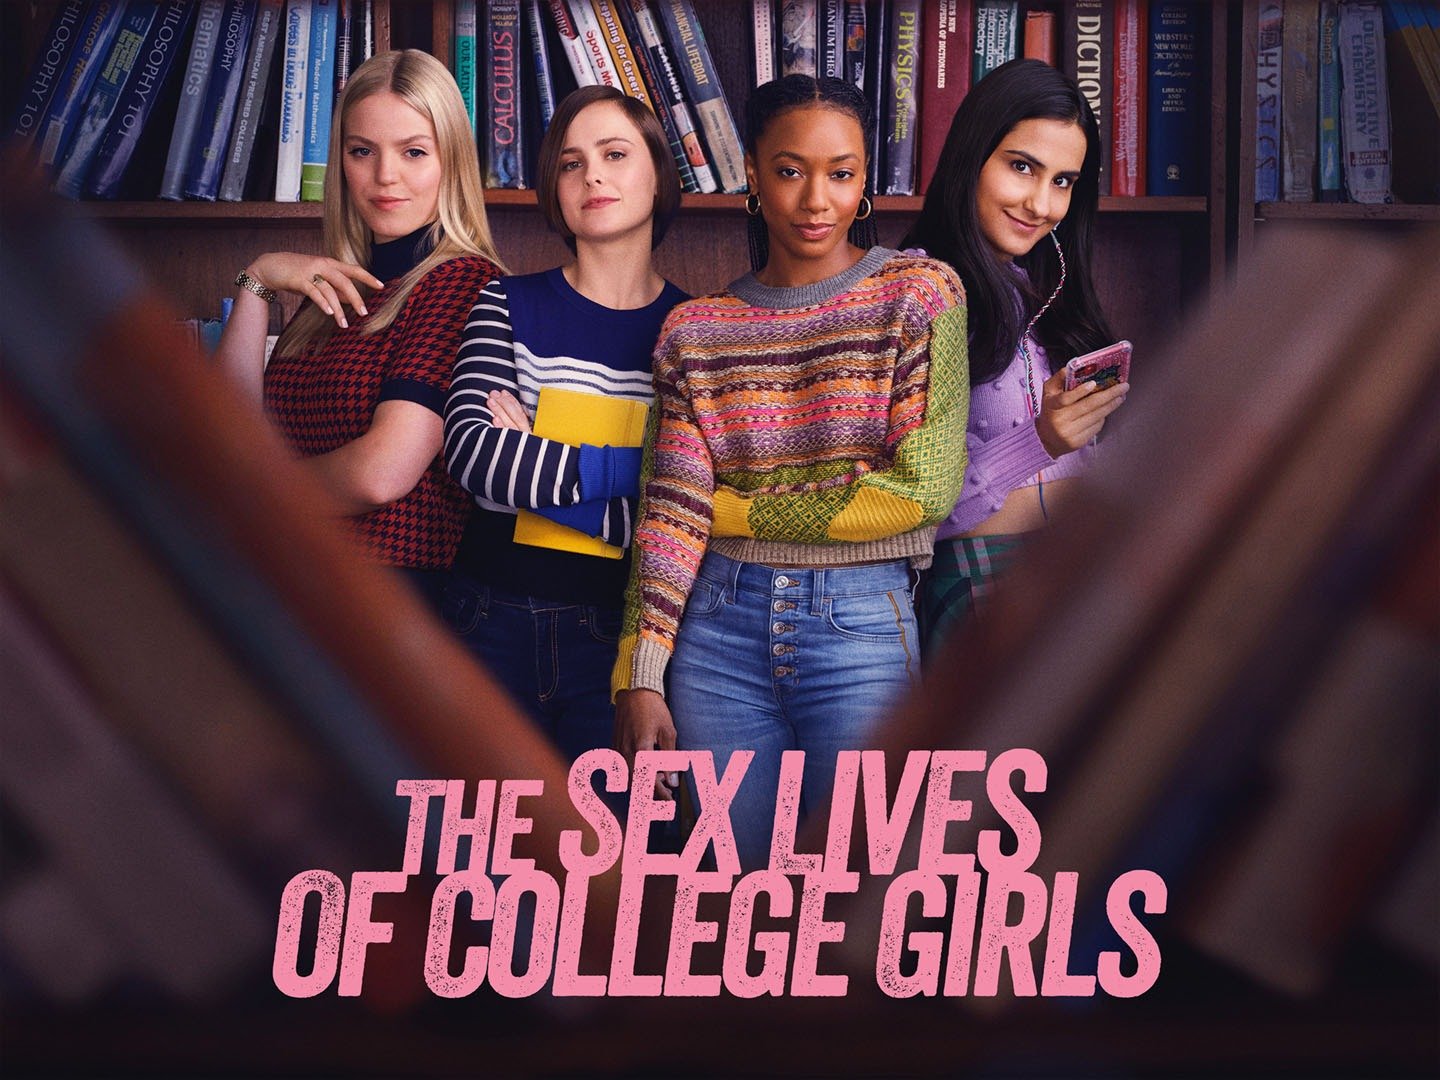 The Sex Lives of College Girls pic